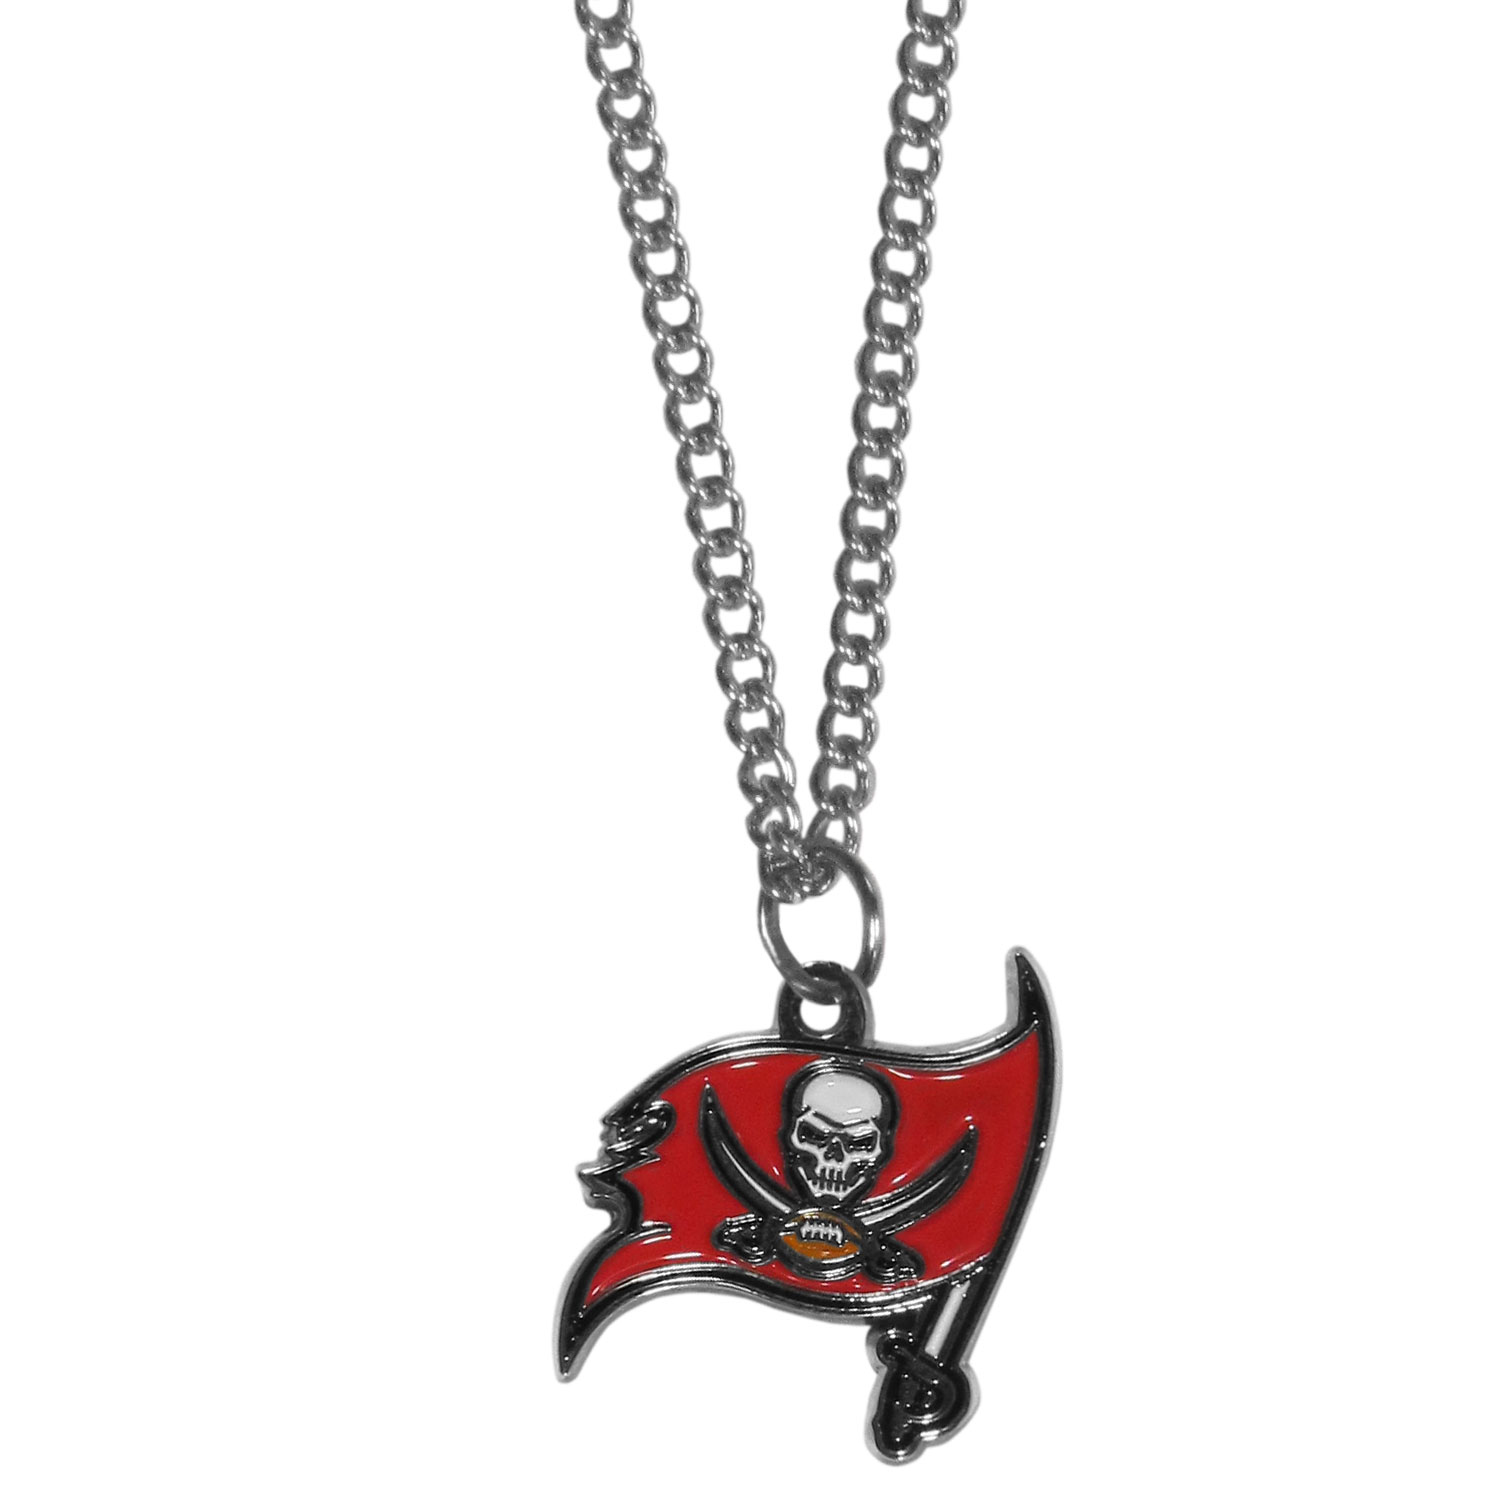 Tampa Bay Buccaneers Chain Necklace with Small Charm | Fanhood Gear